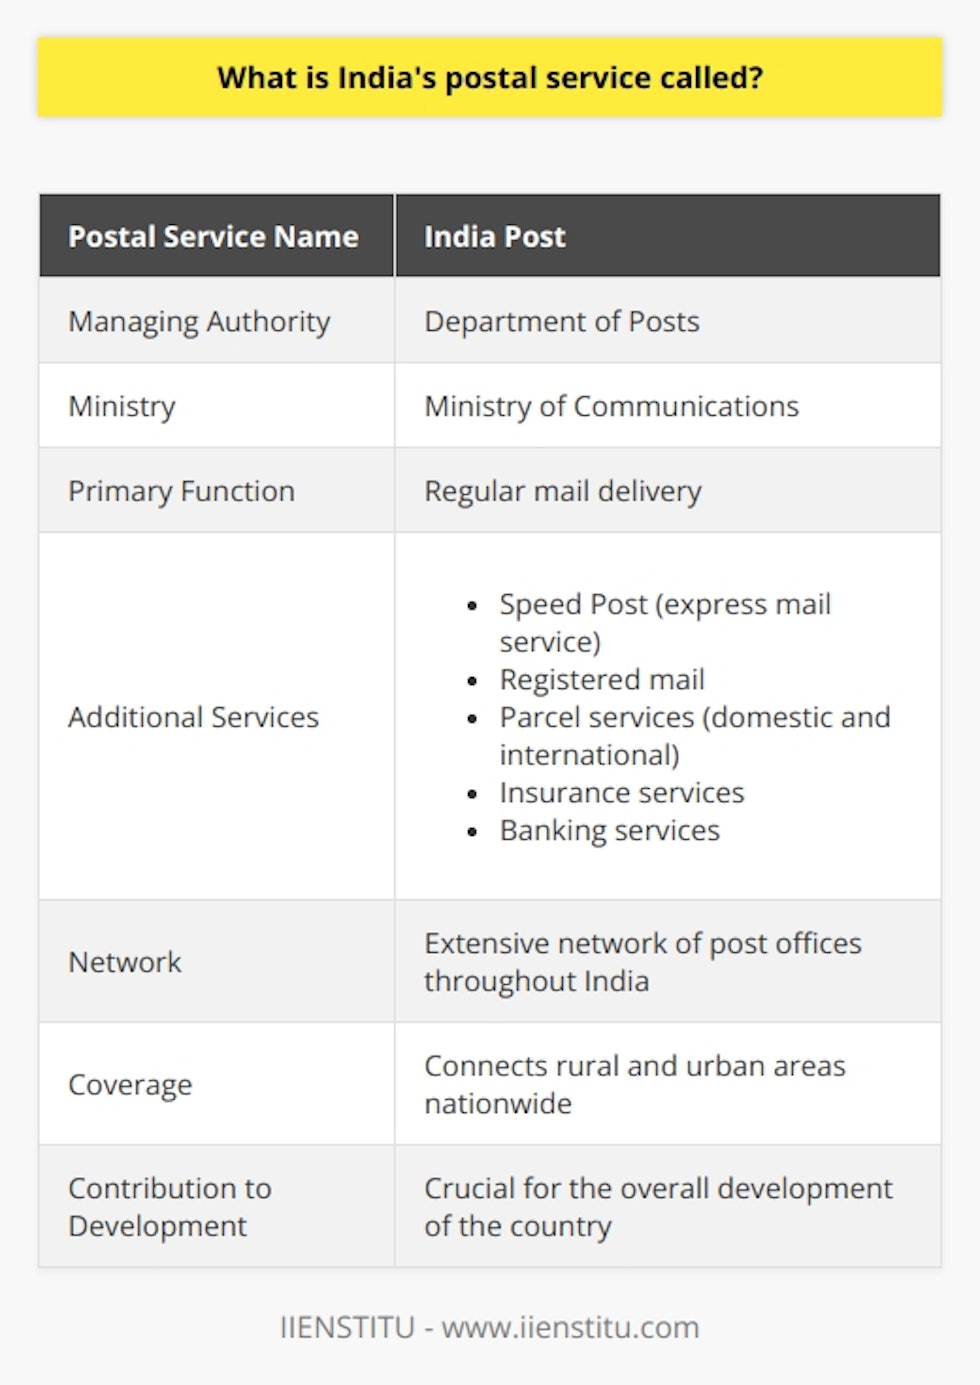 India's postal service, known as India Post, is a crucial component of the country's communication infrastructure. Managed by the Department of Posts under the Ministry of Communications, India Post plays a pivotal role in digitizing and expanding postal services for the convenience of the Indian population. With an extensive network of post offices, India Post ensures its presence throughout the nation, connecting rural and urban areas alike. This strategic distribution facilitates reliable and accessible communication for every Indian citizen. The widespread coverage of India Post truly sets it apart from other postal services. In addition to its primary function of delivering regular mail, India Post offers an array of services to meet the diverse needs of the people. Speed Post, also known as express mail service, enables expedited delivery for time-sensitive items. Registered mail provides a secure and traceable mailing option. Parcel services allow for the shipment of packages both within India and internationally. Moreover, India Post provides insurance and banking services, further expanding its reach and utility.India Post's versatility and comprehensive range of services make it an indispensable institution for countless Indians. Its commitment to meeting the varied communication needs of the population contributes significantly to the overall development of the country.In summary, India's postal service, India Post, serves as the primary authority for postal services in the country. Its extensive reach, broad range of services, and commitment to enhancing communication make it a crucial element of India's communication system.